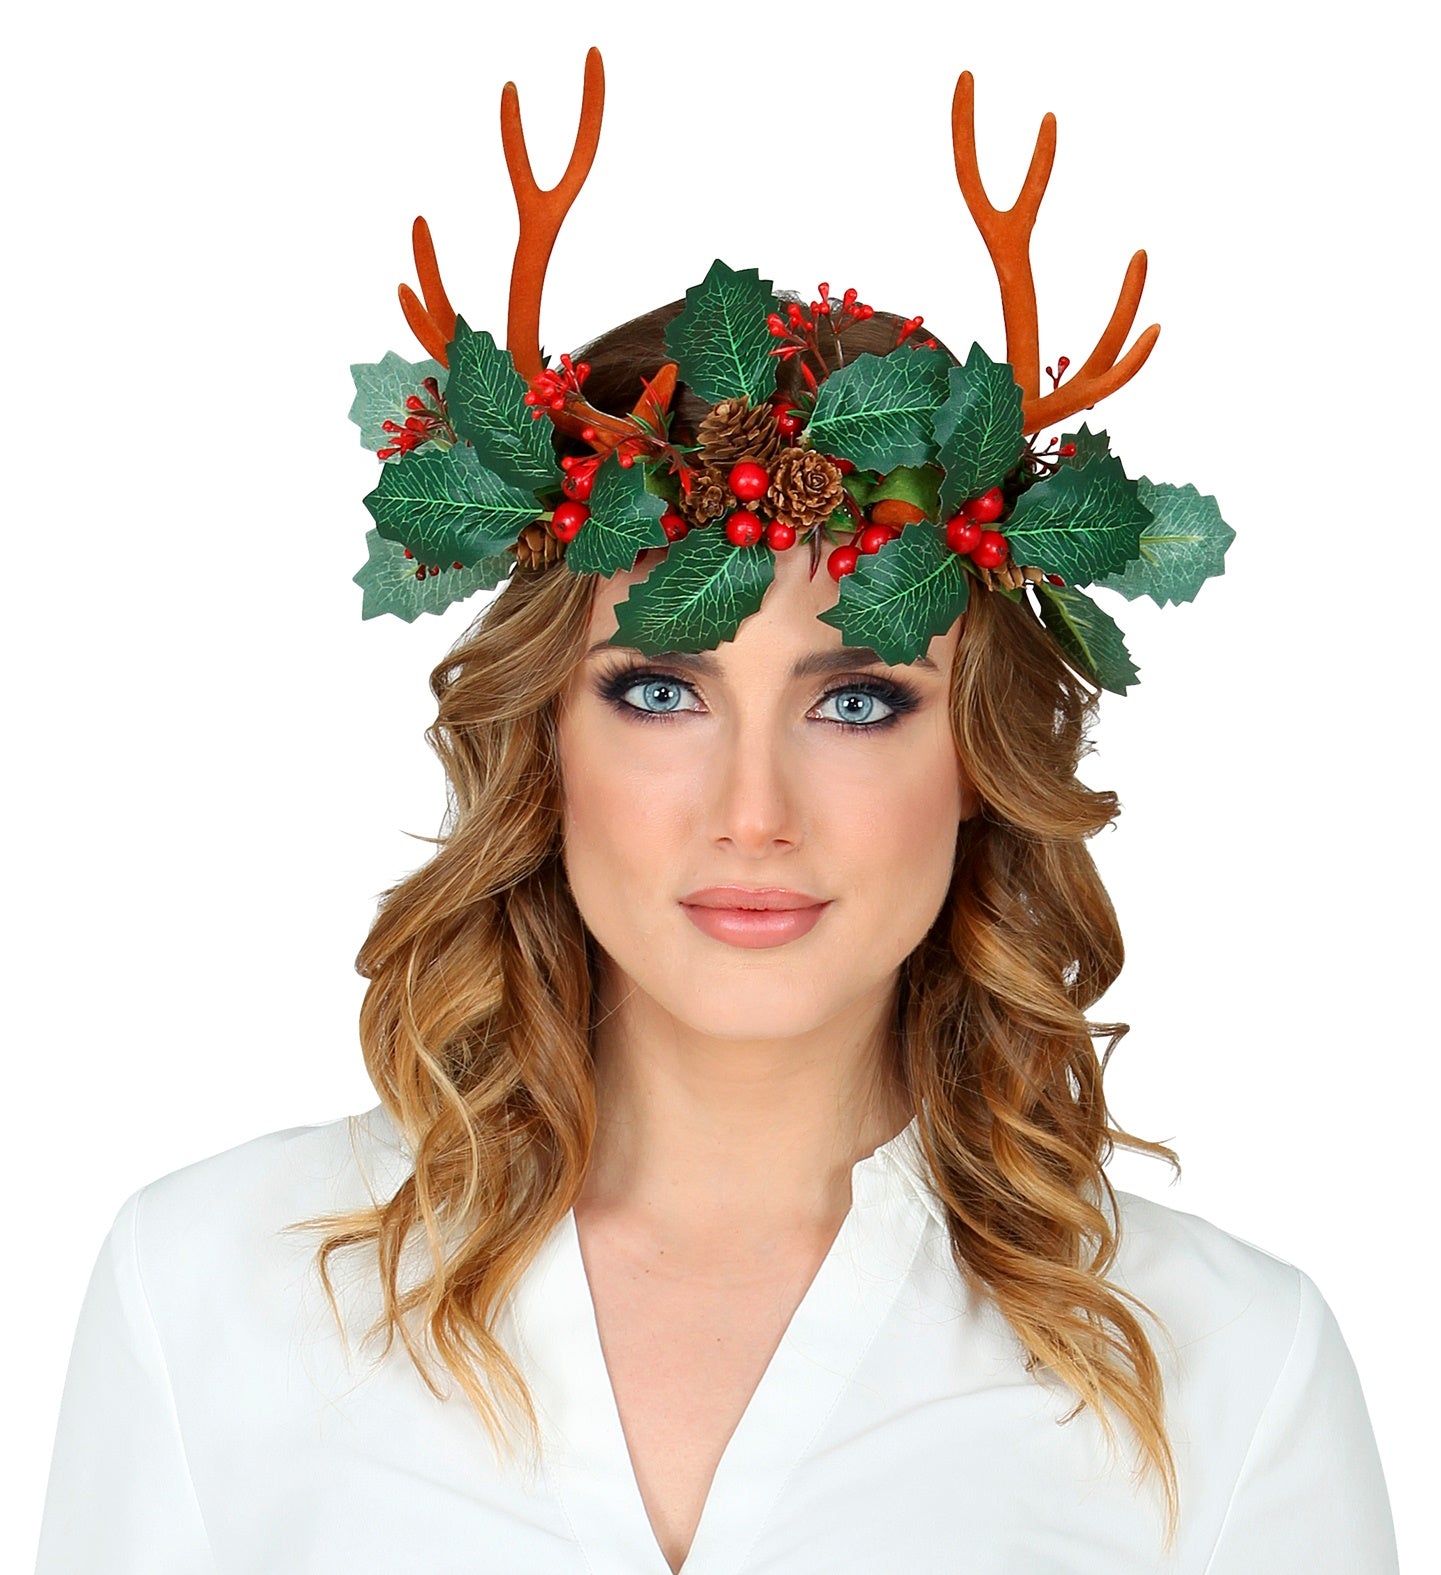 Reindeer Antlers with Holly and Pinecones headpiece